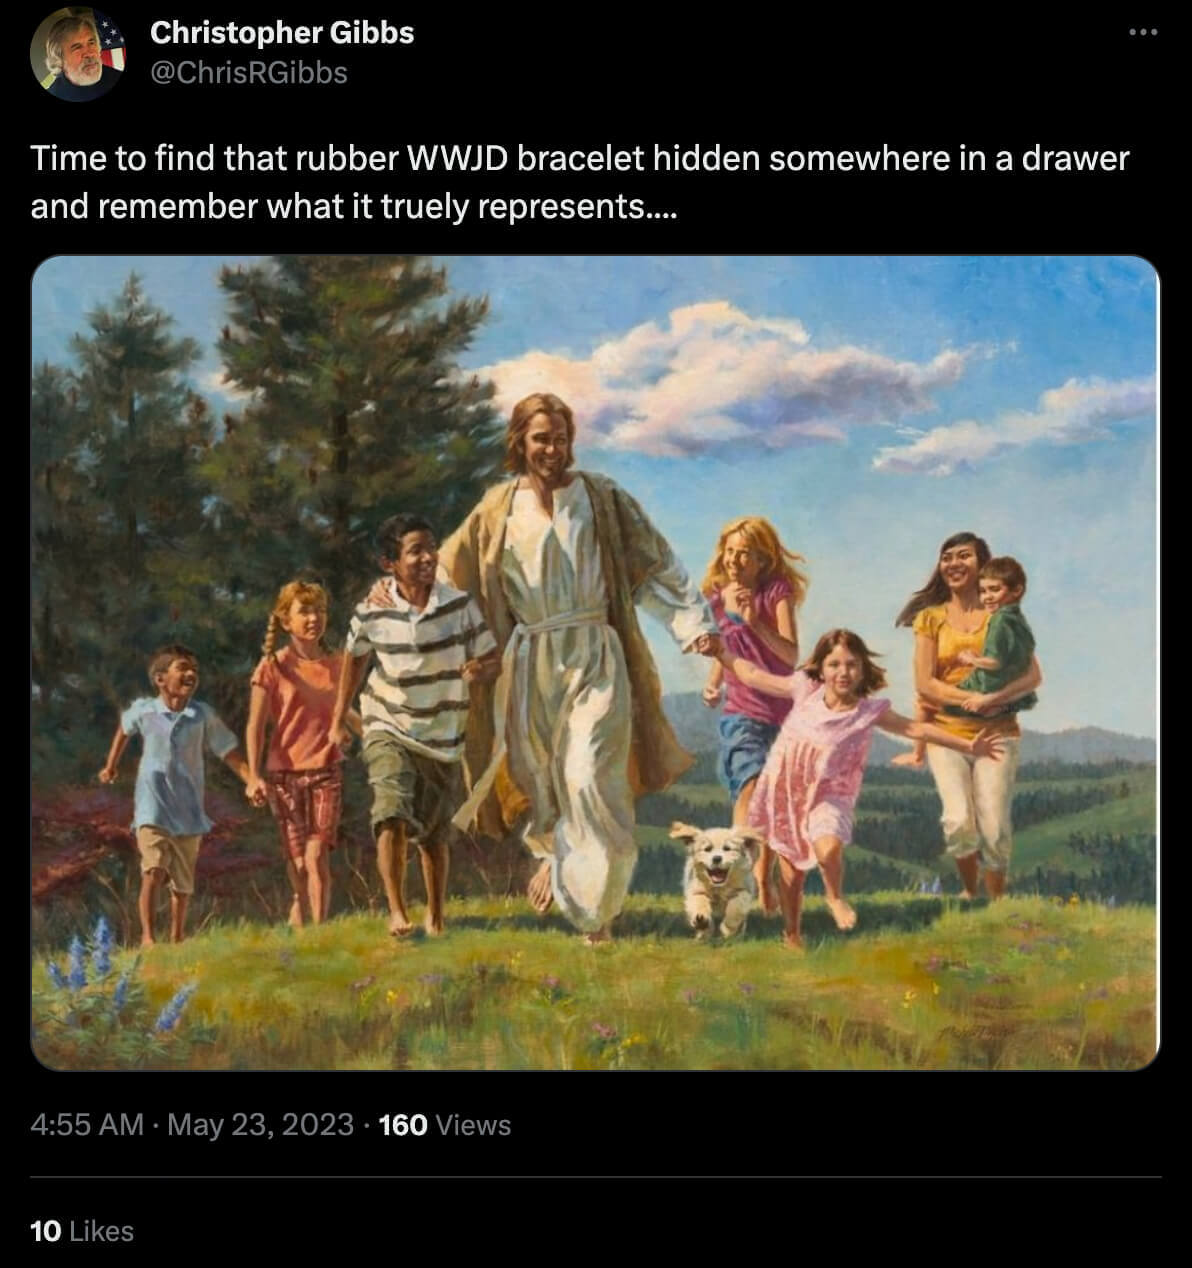 Tweet about the old WWJD bracelet while challenging other Christians